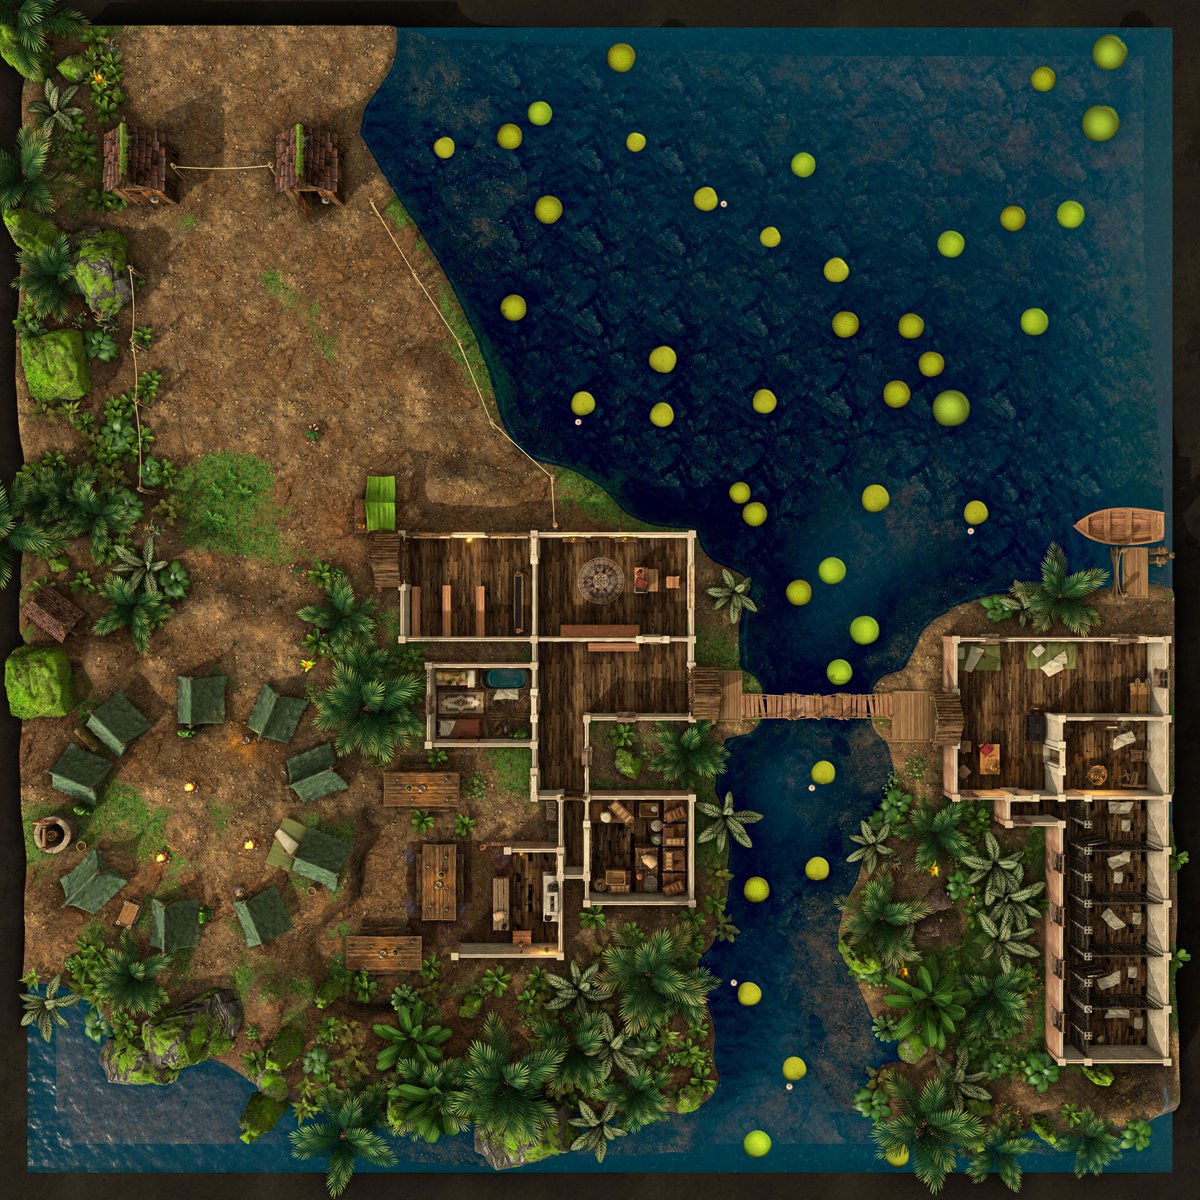 Just finished a pretty rad map on @DungeonAlchemi1 for my upcoming campaign with my players. Definitely looking forward to more modern (less DnD) assets since my game is set in 1960s, but I think I did a good job with an island prison garrison in Peru. https://t.co/9pJS35GB8f